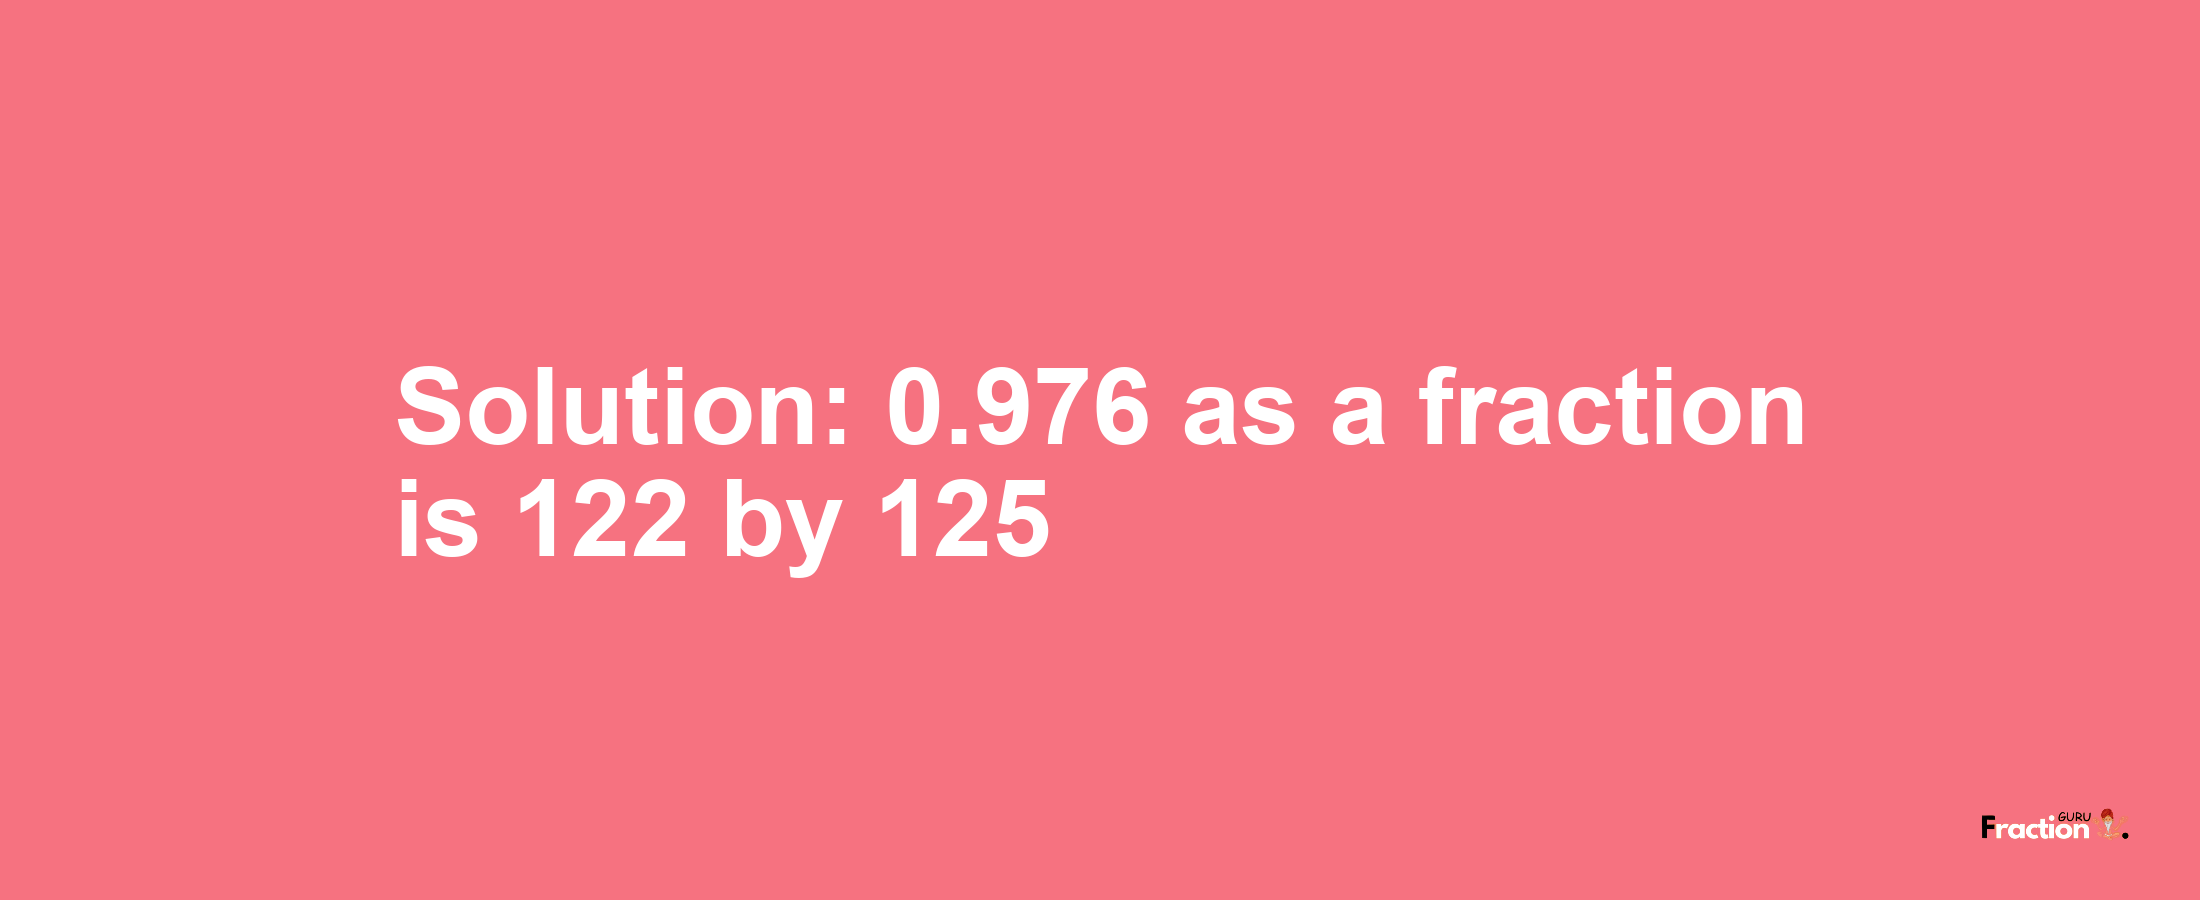 Solution:0.976 as a fraction is 122/125